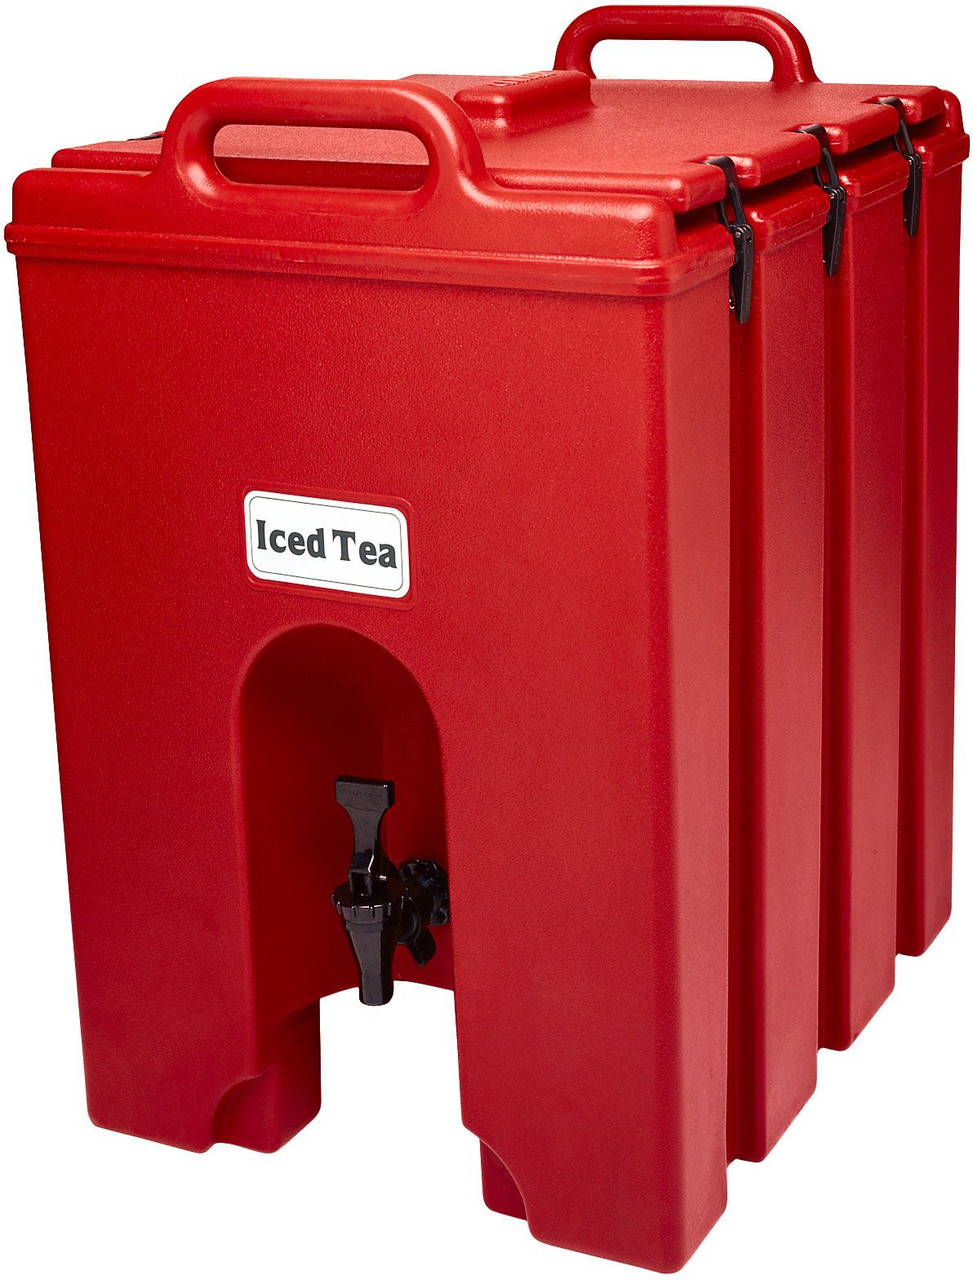 Cambro 1000LCD158 11.75 Gallon Camtainer Beverage Carrier - Red